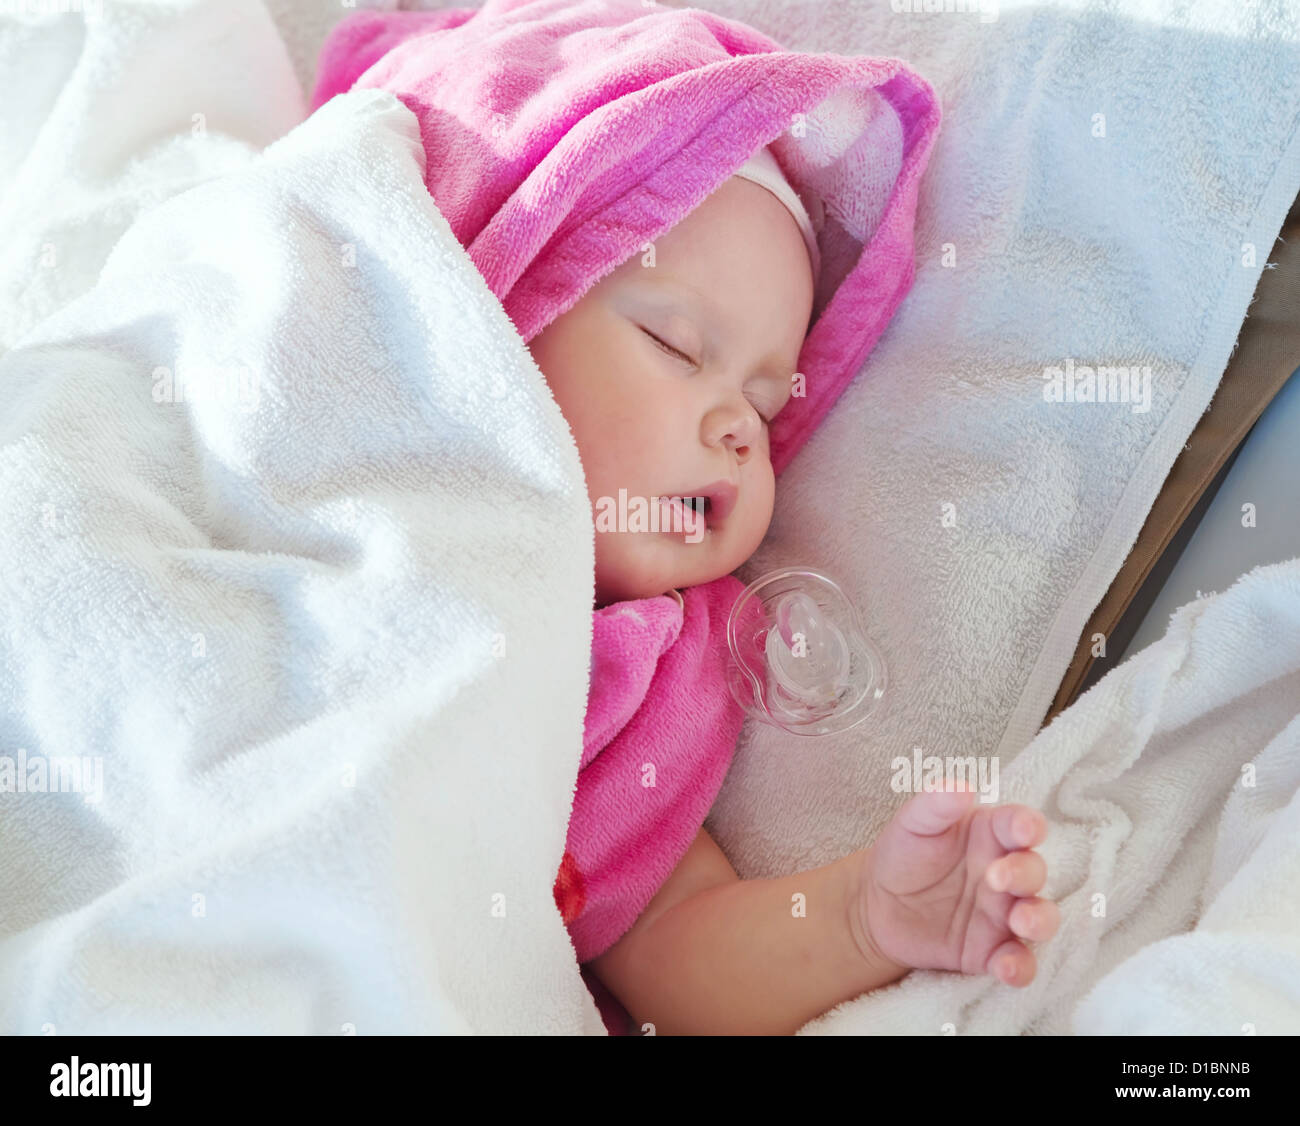 Baby girl sleeps under pink and white cotton towels with a pacifier nearby Stock Photo